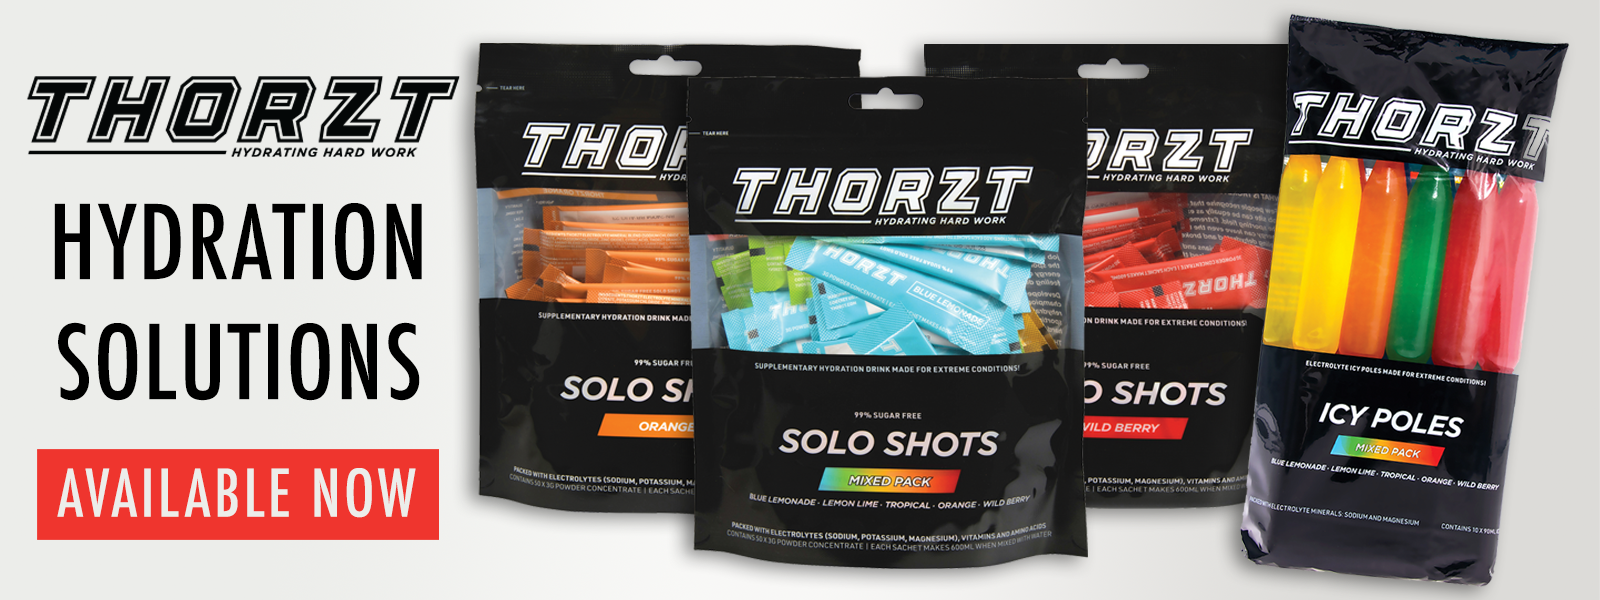 THORZT Hydration Solutions available now from Pac Fire - view our range.